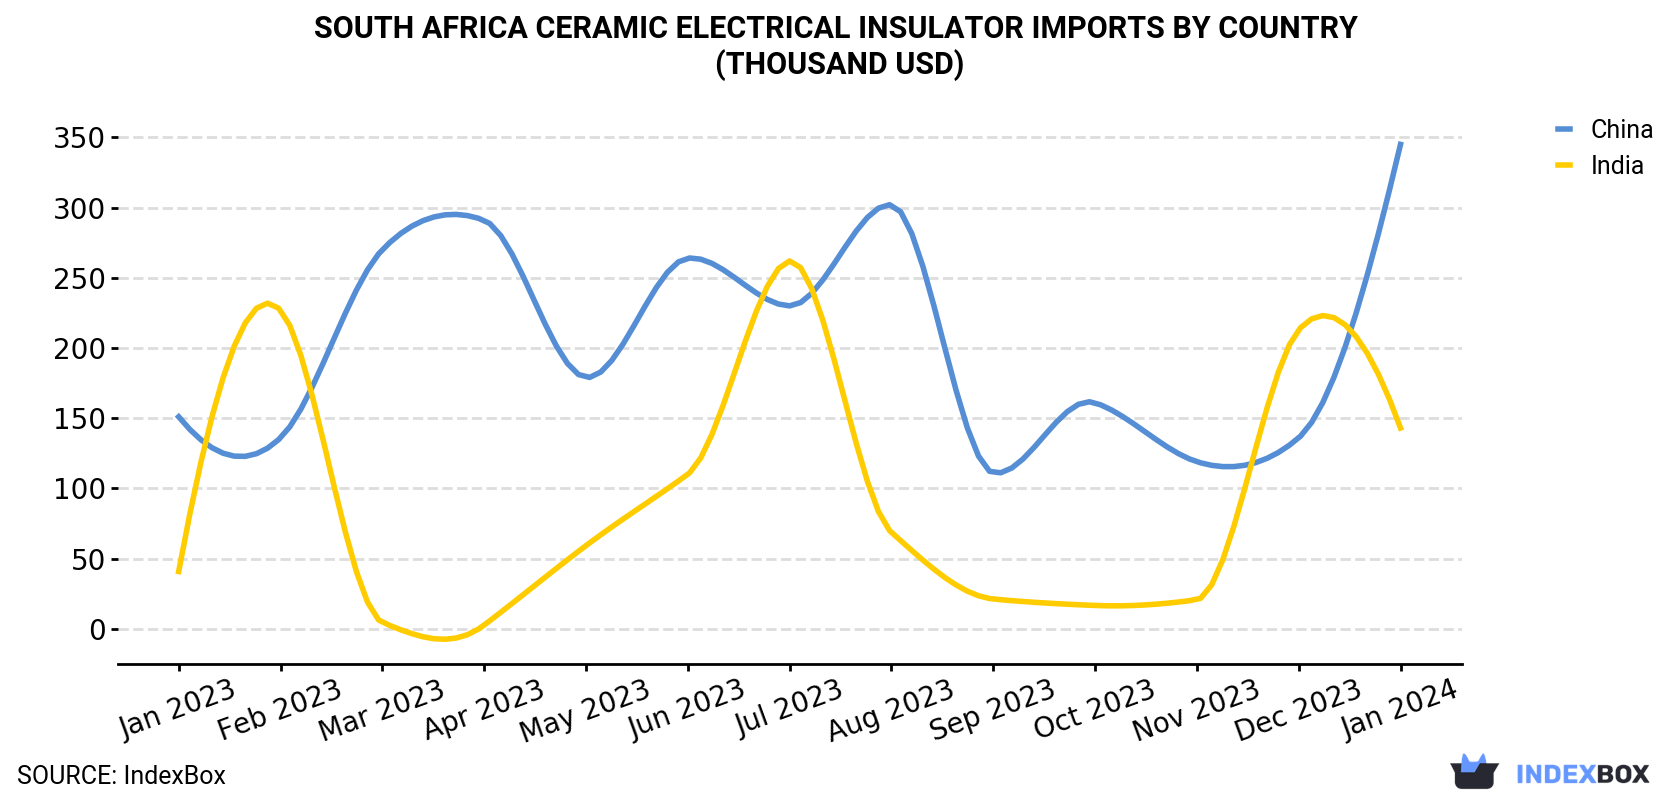 South Africa Ceramic Electrical Insulator Imports By Country (Thousand USD)